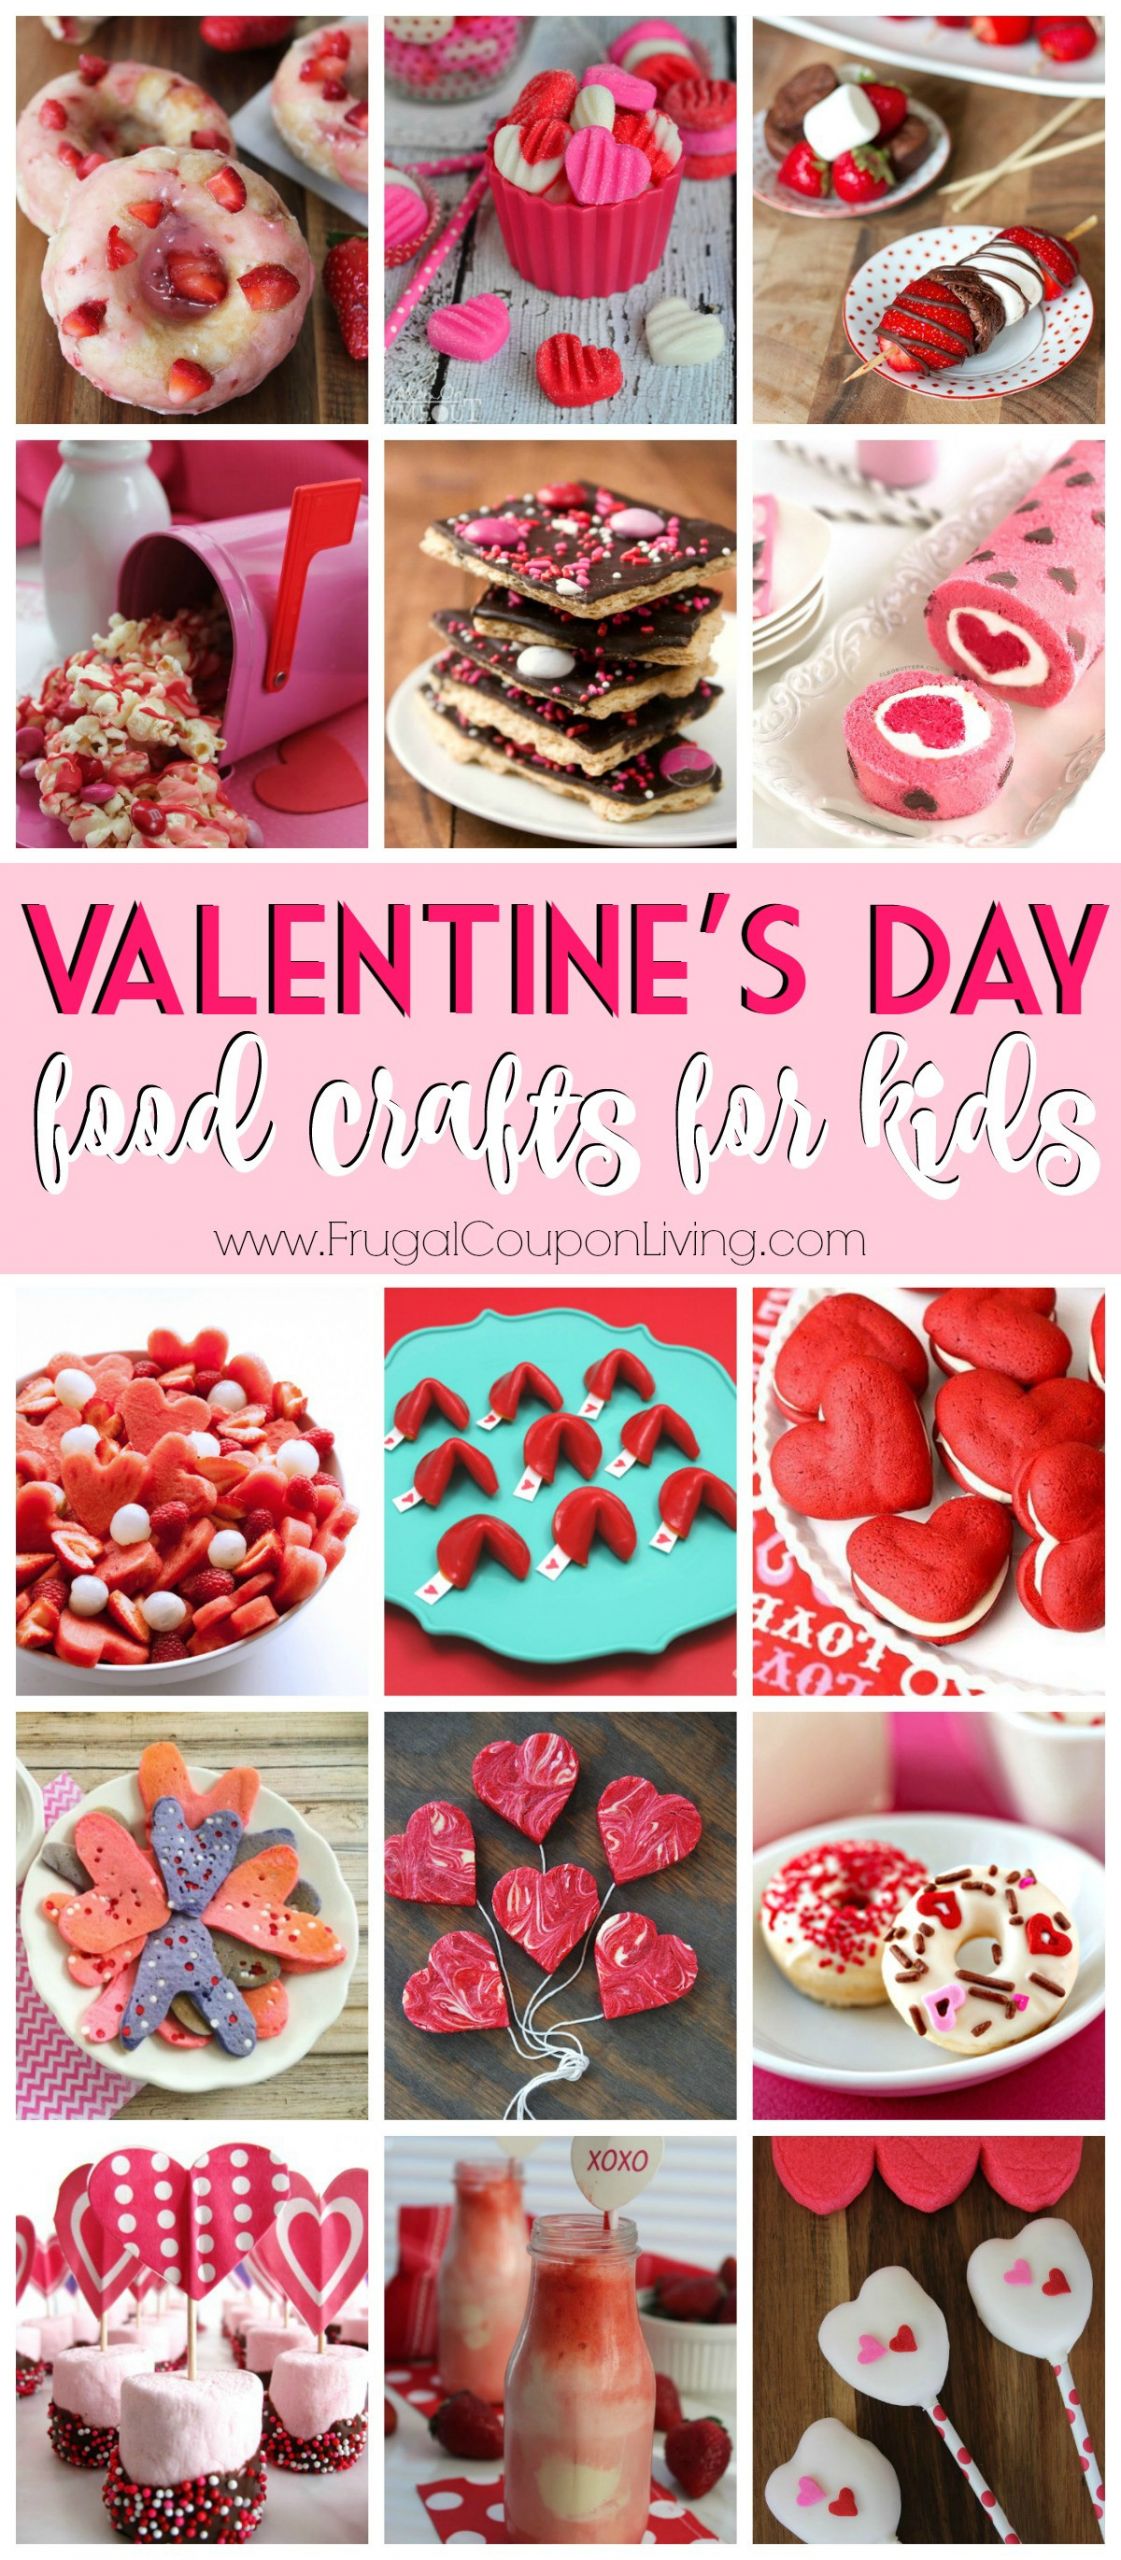 Valentines Day Recipes For Kids
 Strawberry Glazed Doughnuts Recipe Baked Not Fried